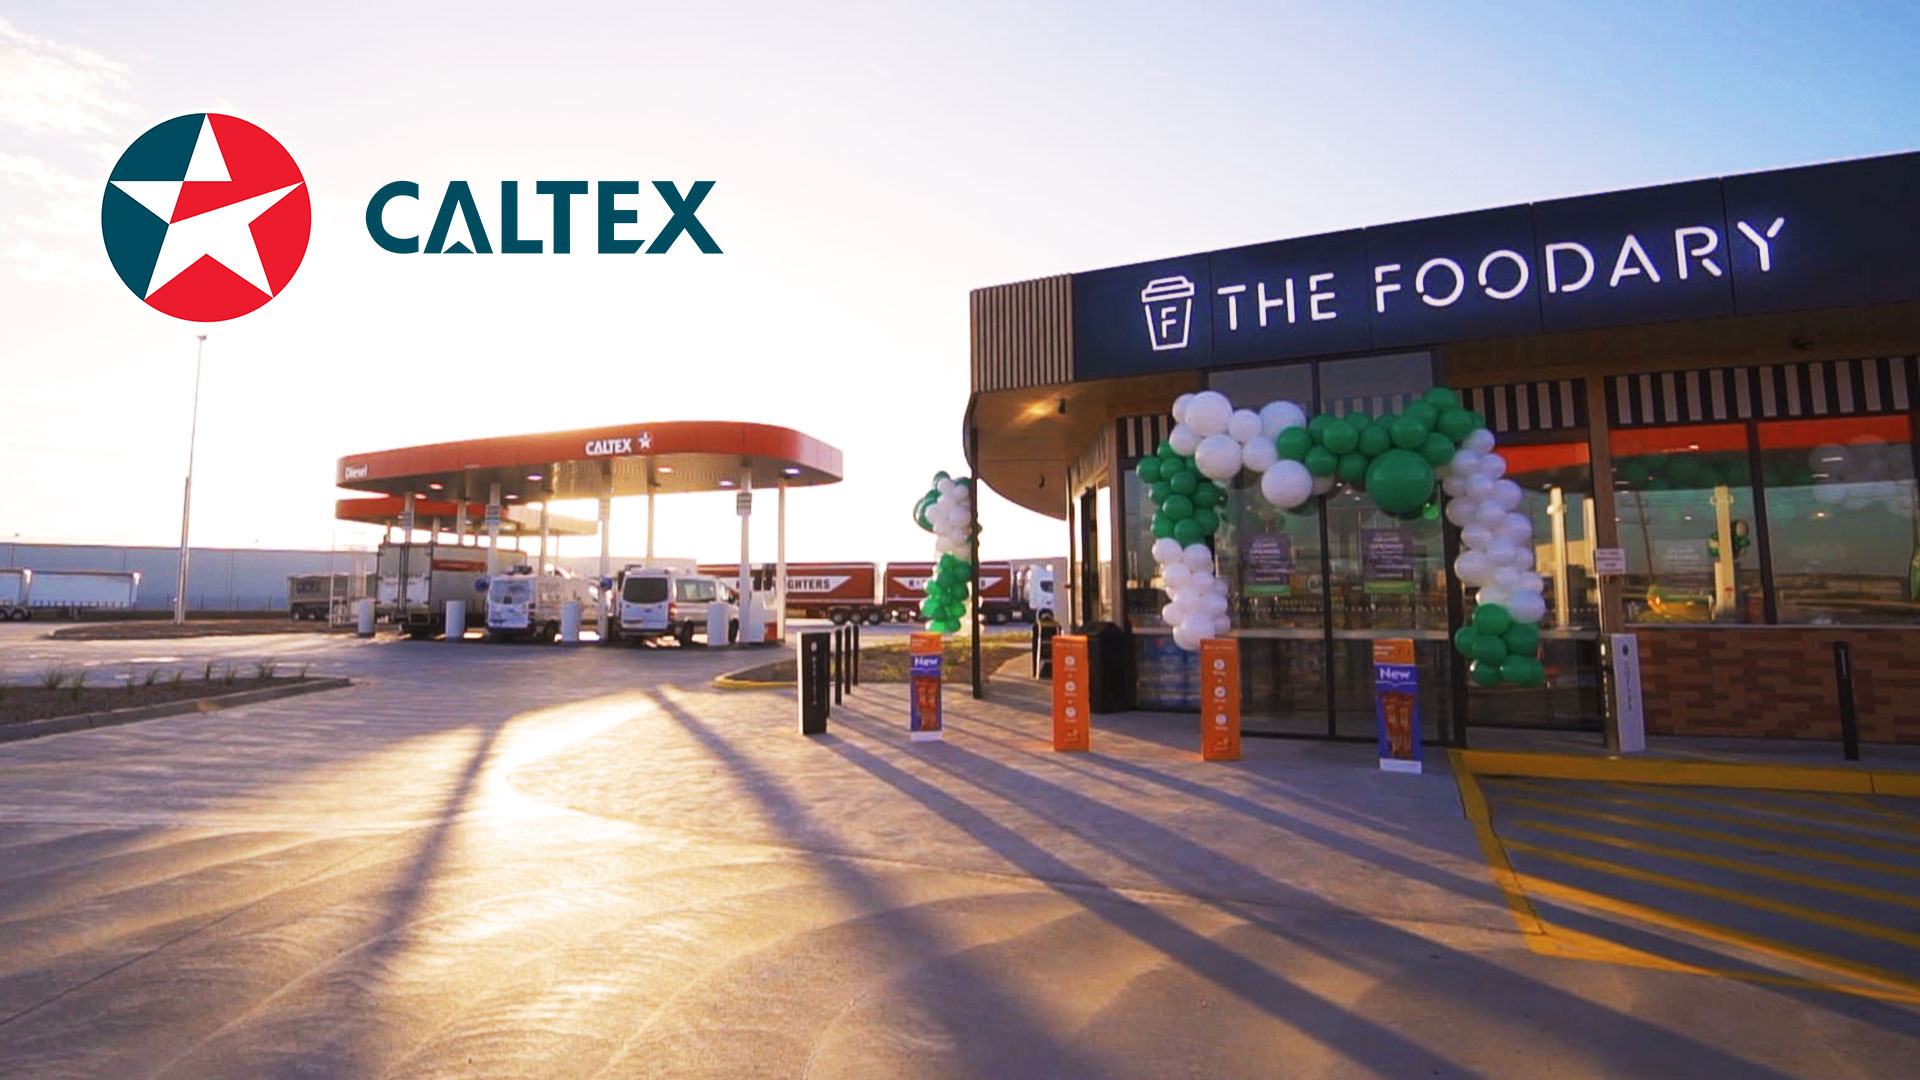 Caltex, Foodary flagship store opening– Derrimut